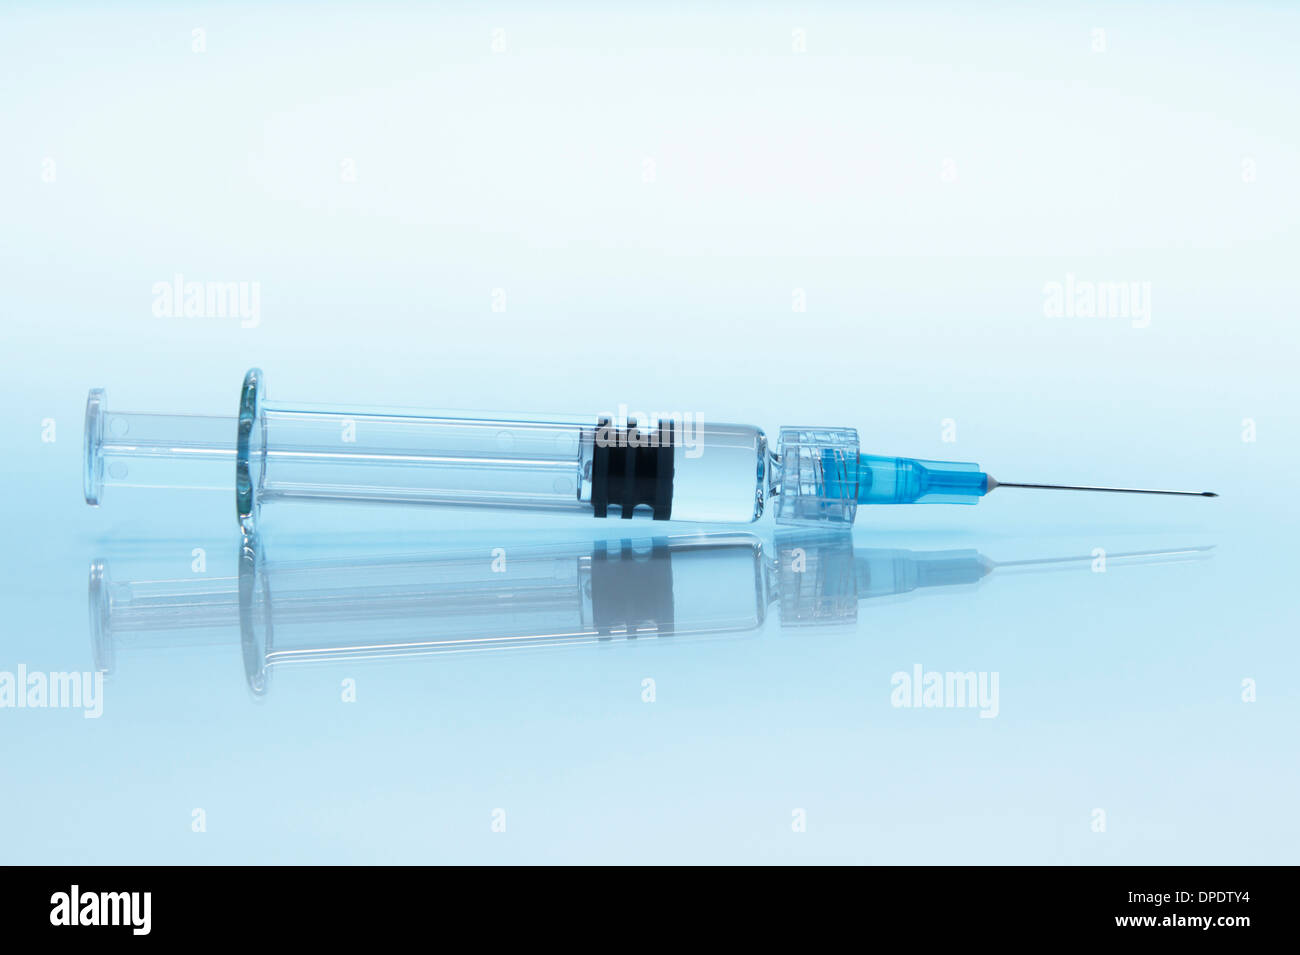 Disposable plastic medical syringe with attached hypodermic needle Stock Photo